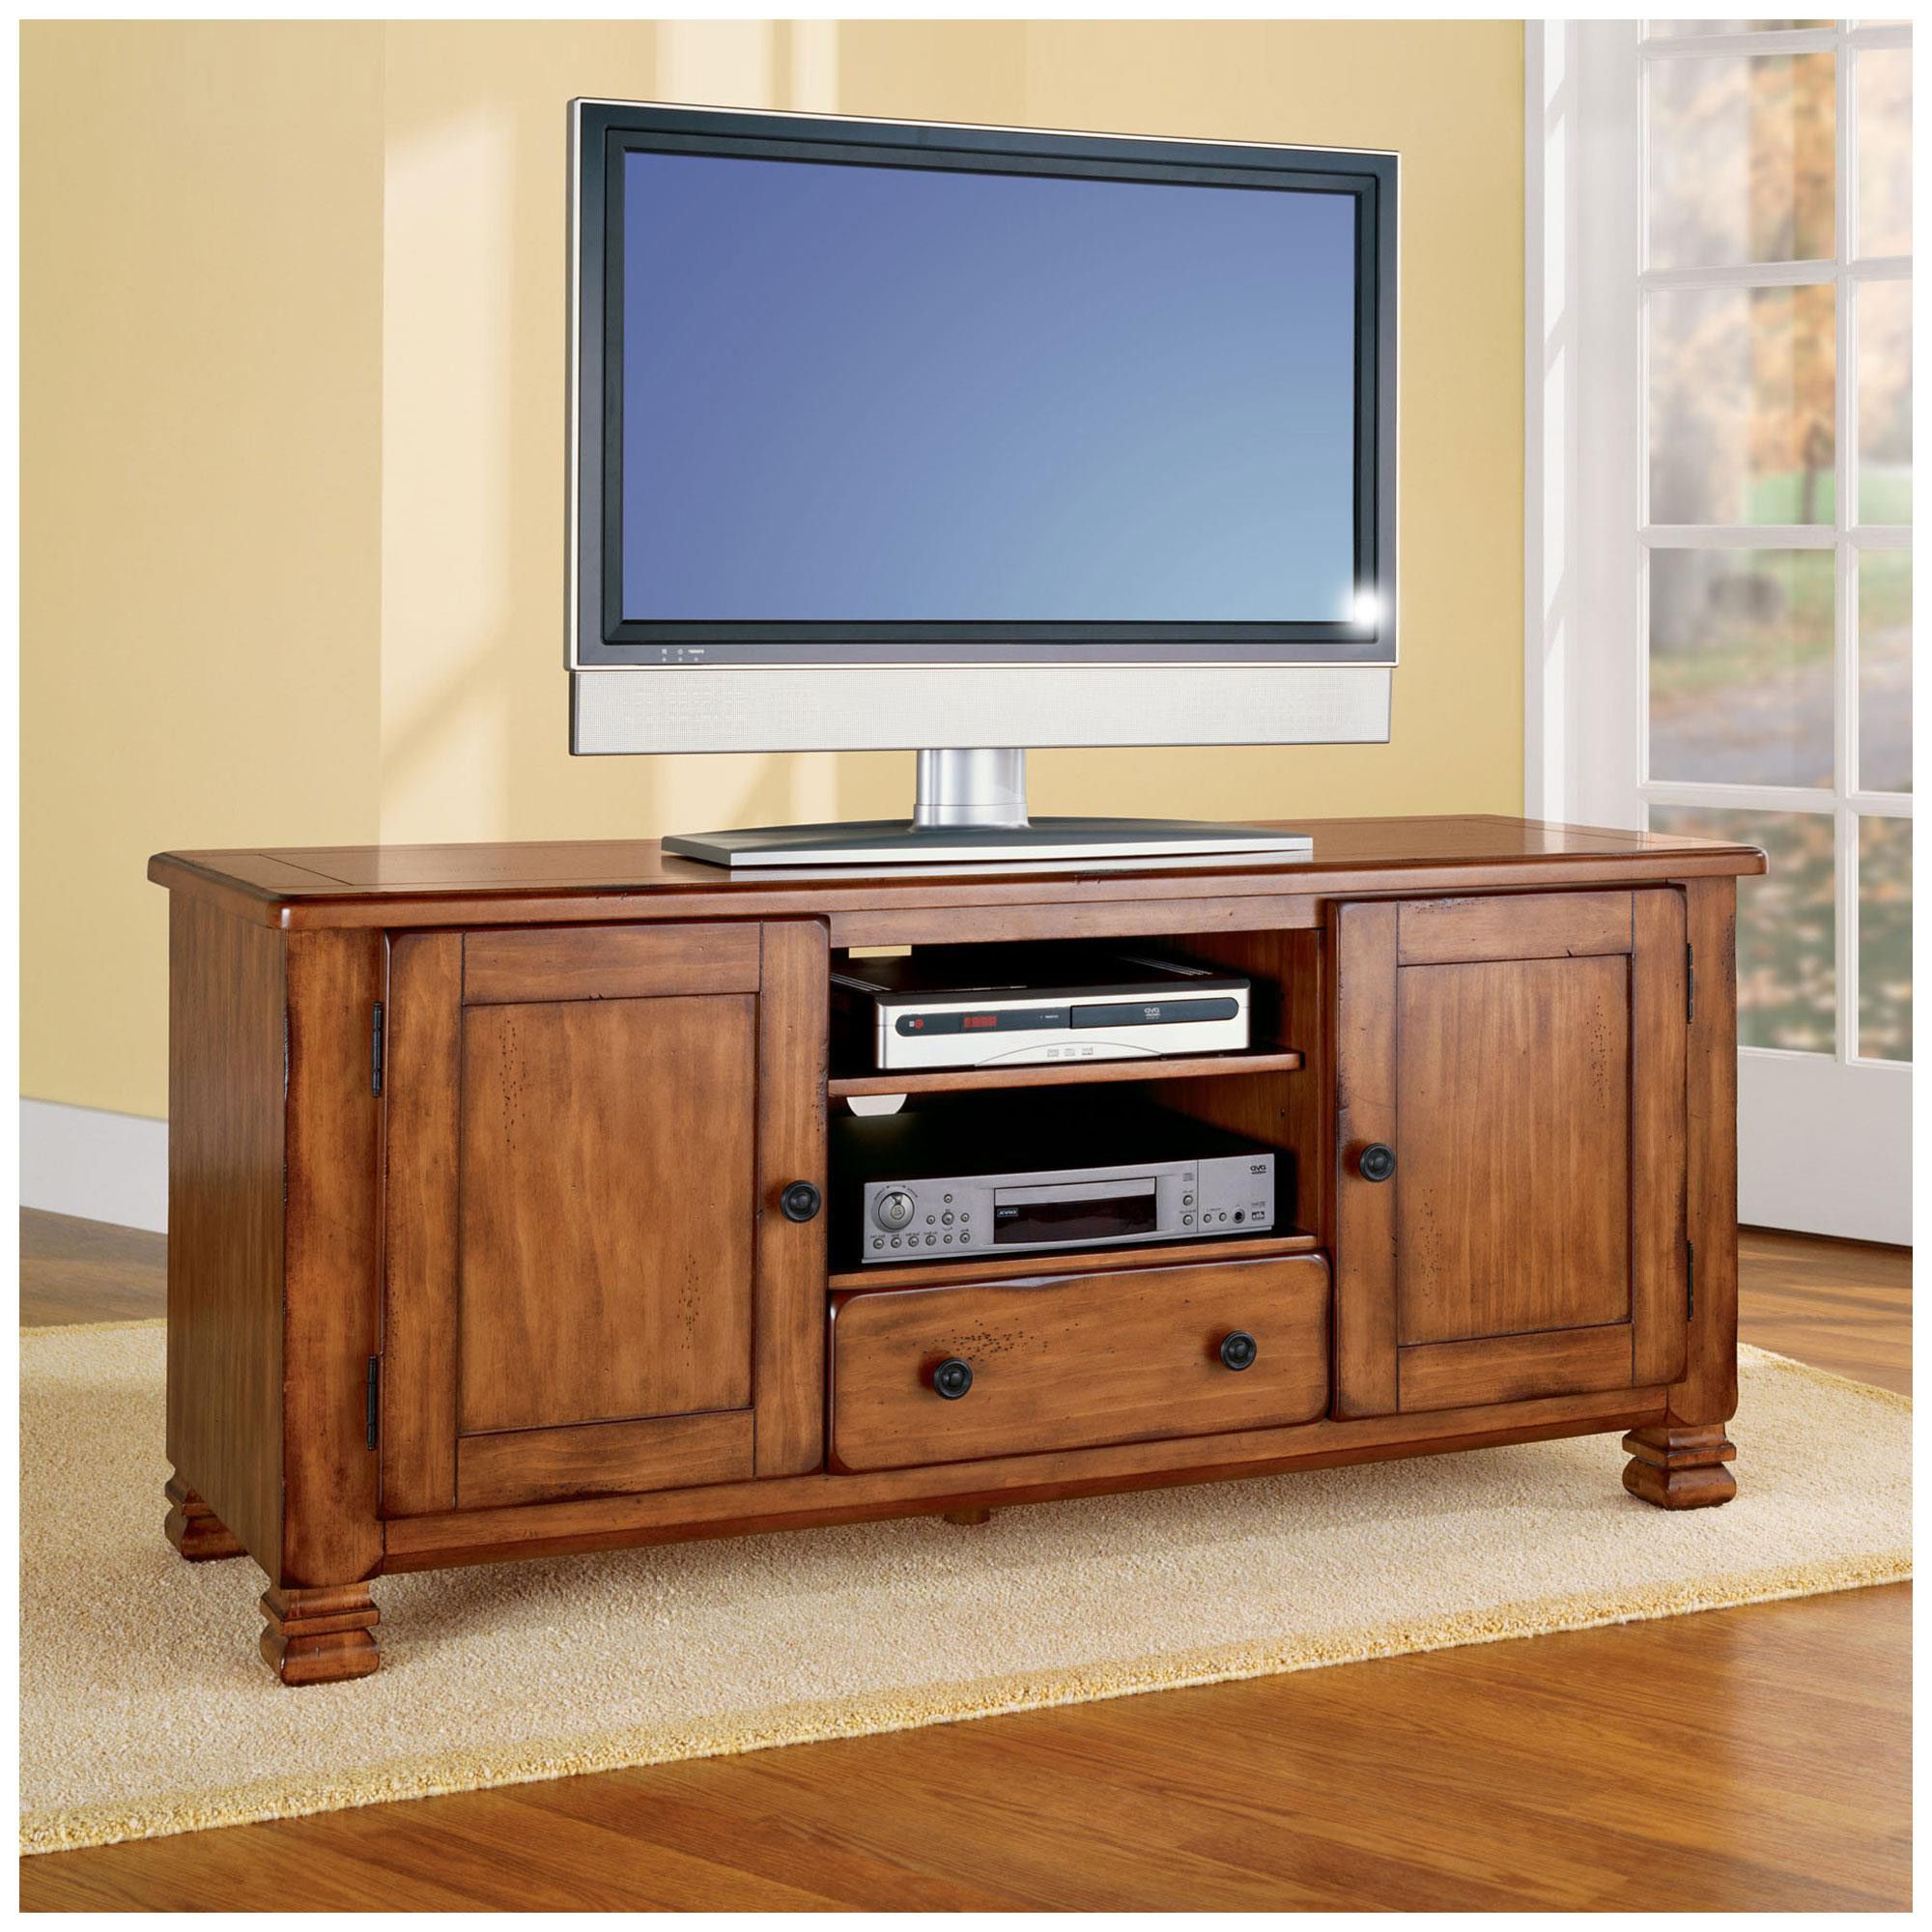 Well Known Amish Corner Tv Stand Solid Wood Console Mission Style Stands For With Oak Tv Cabinets For Flat Screens (View 2 of 20)